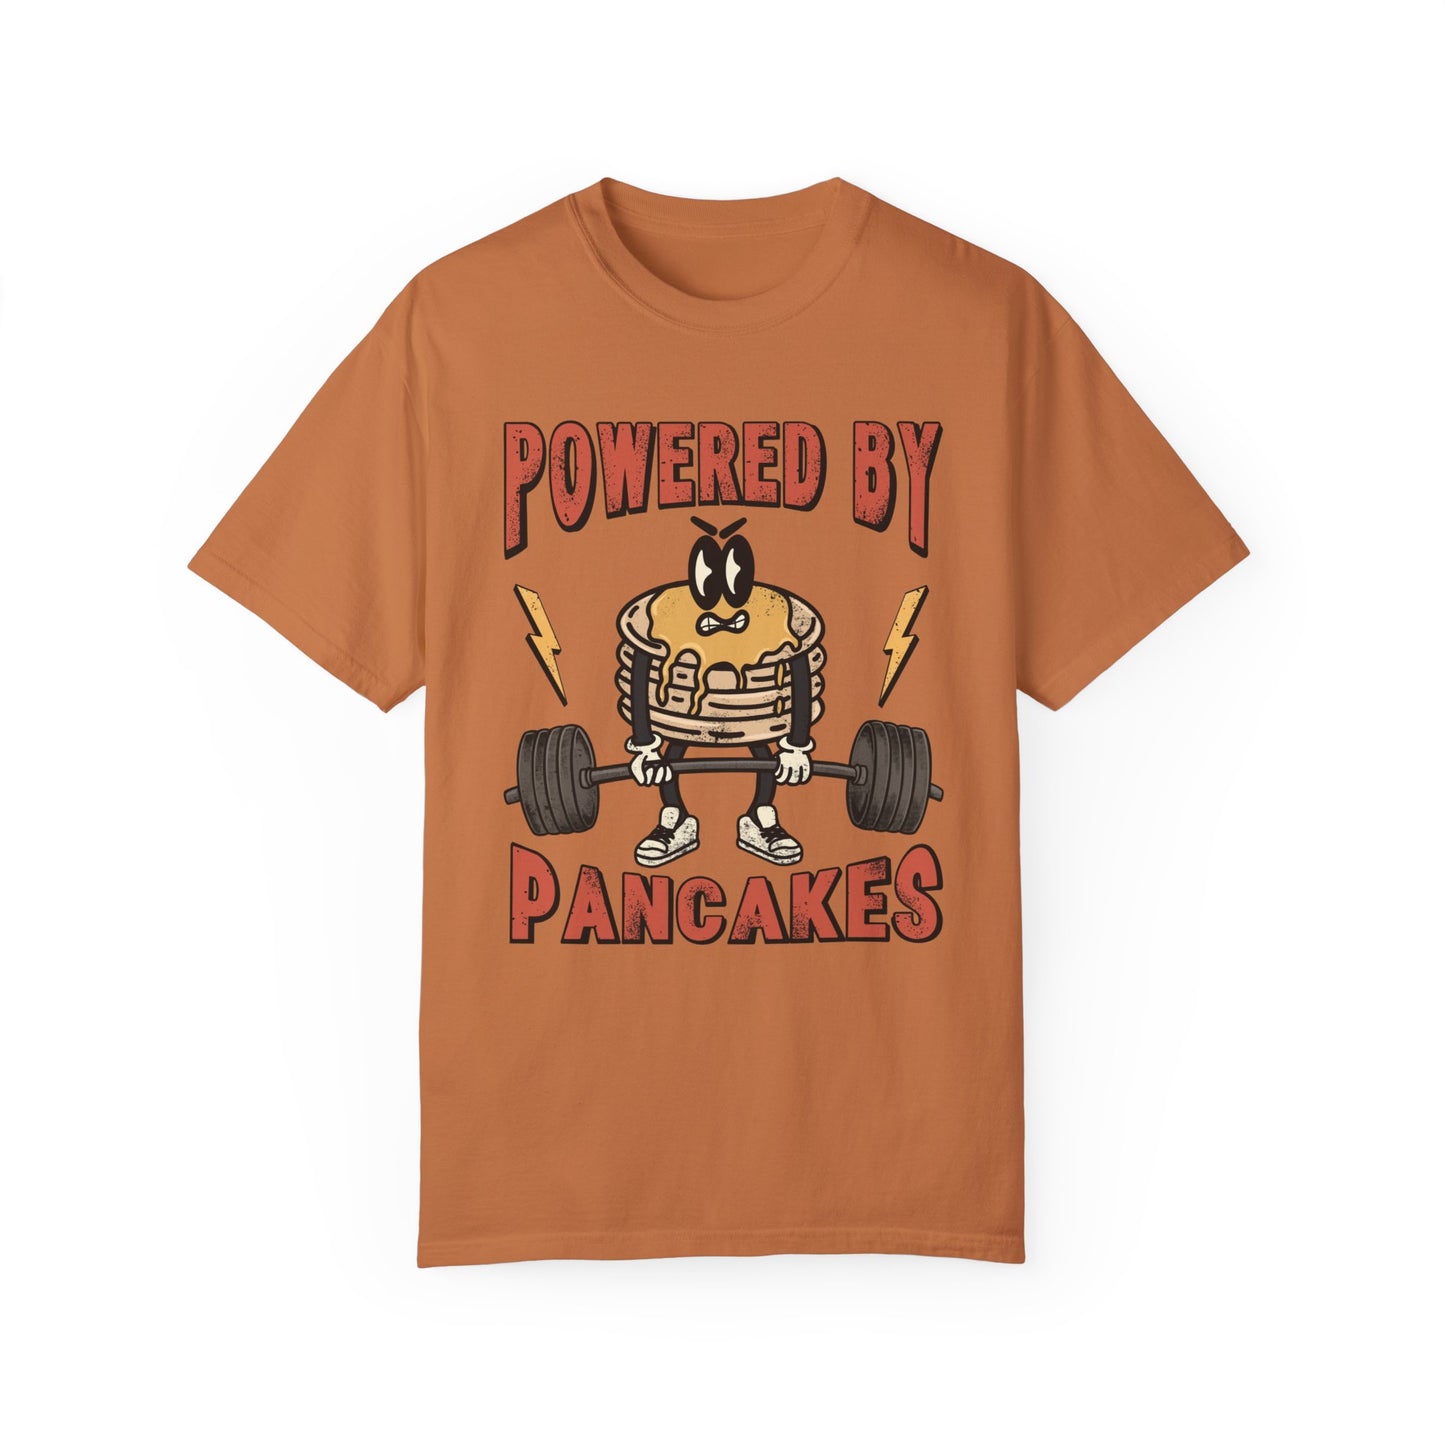 Powered by Pancakes Gym Tee